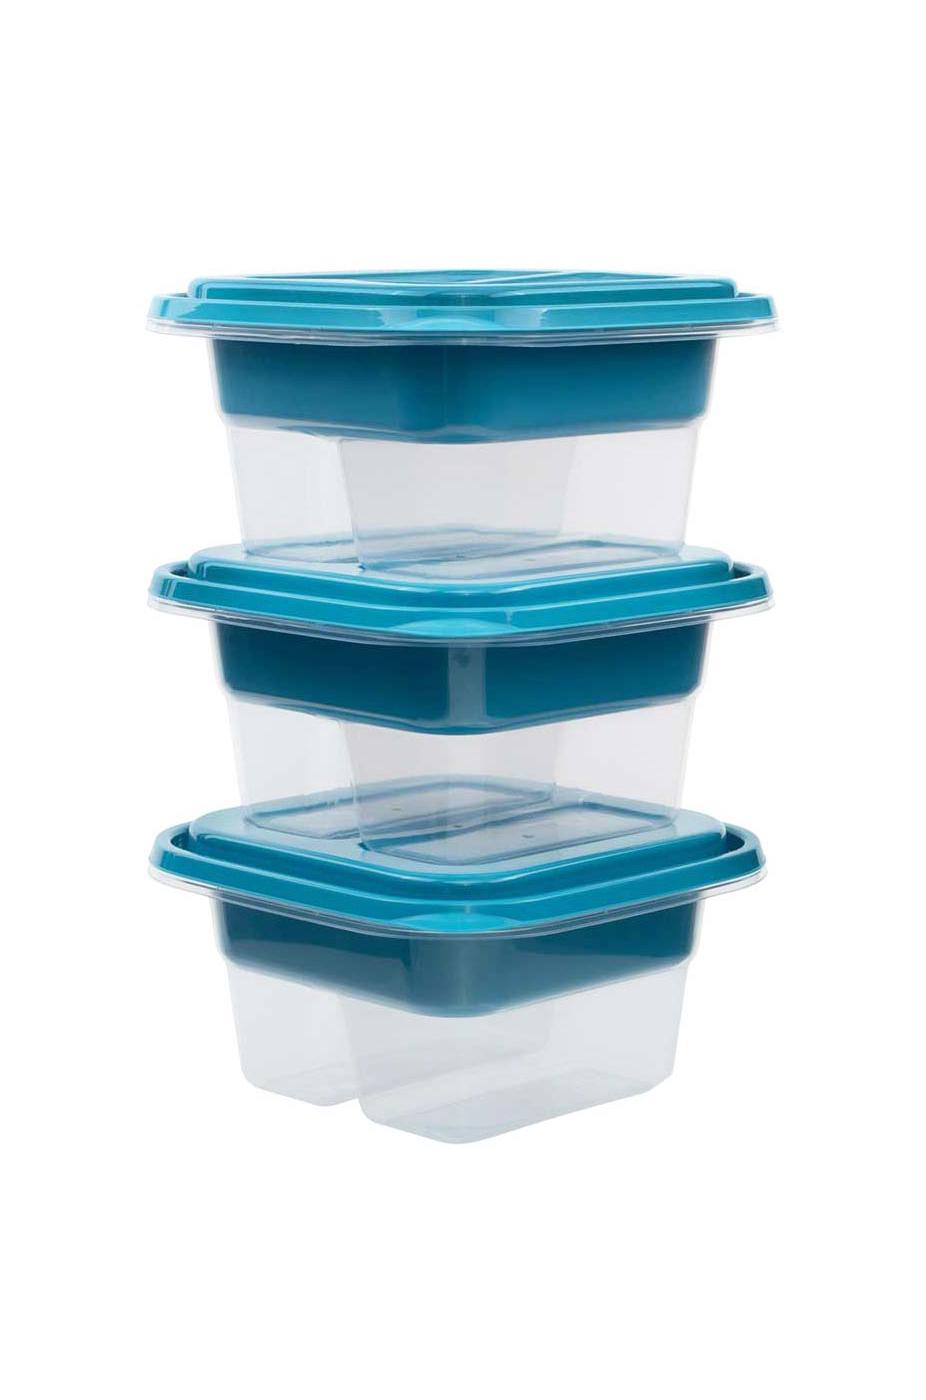 GoodCook EveryWare Lunch Cube Containers; image 2 of 3